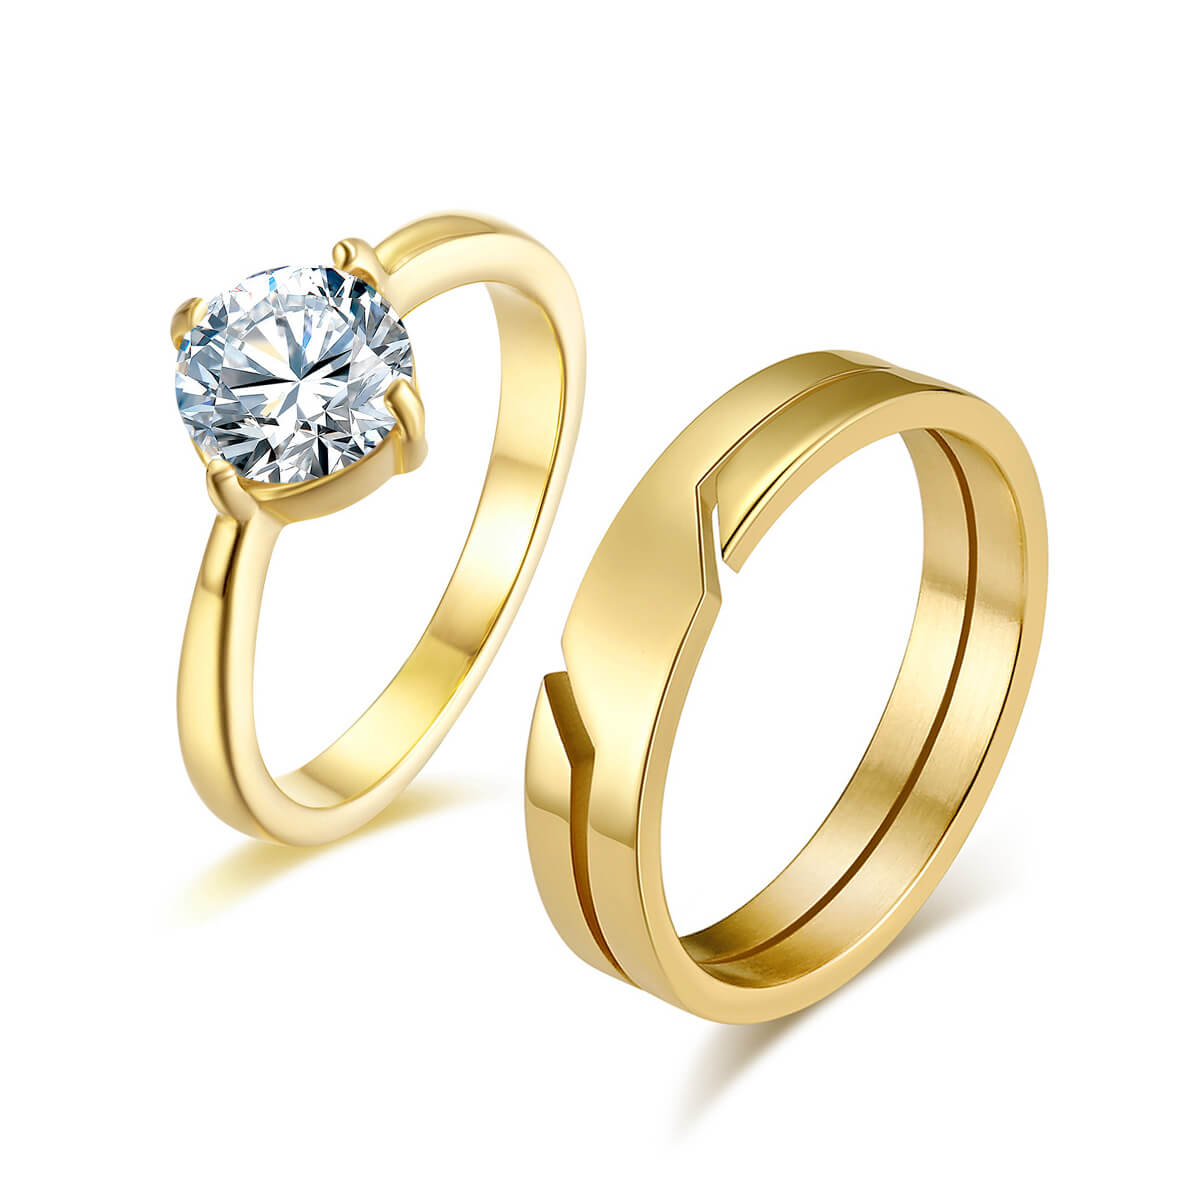 Gold Tone Couple Rings